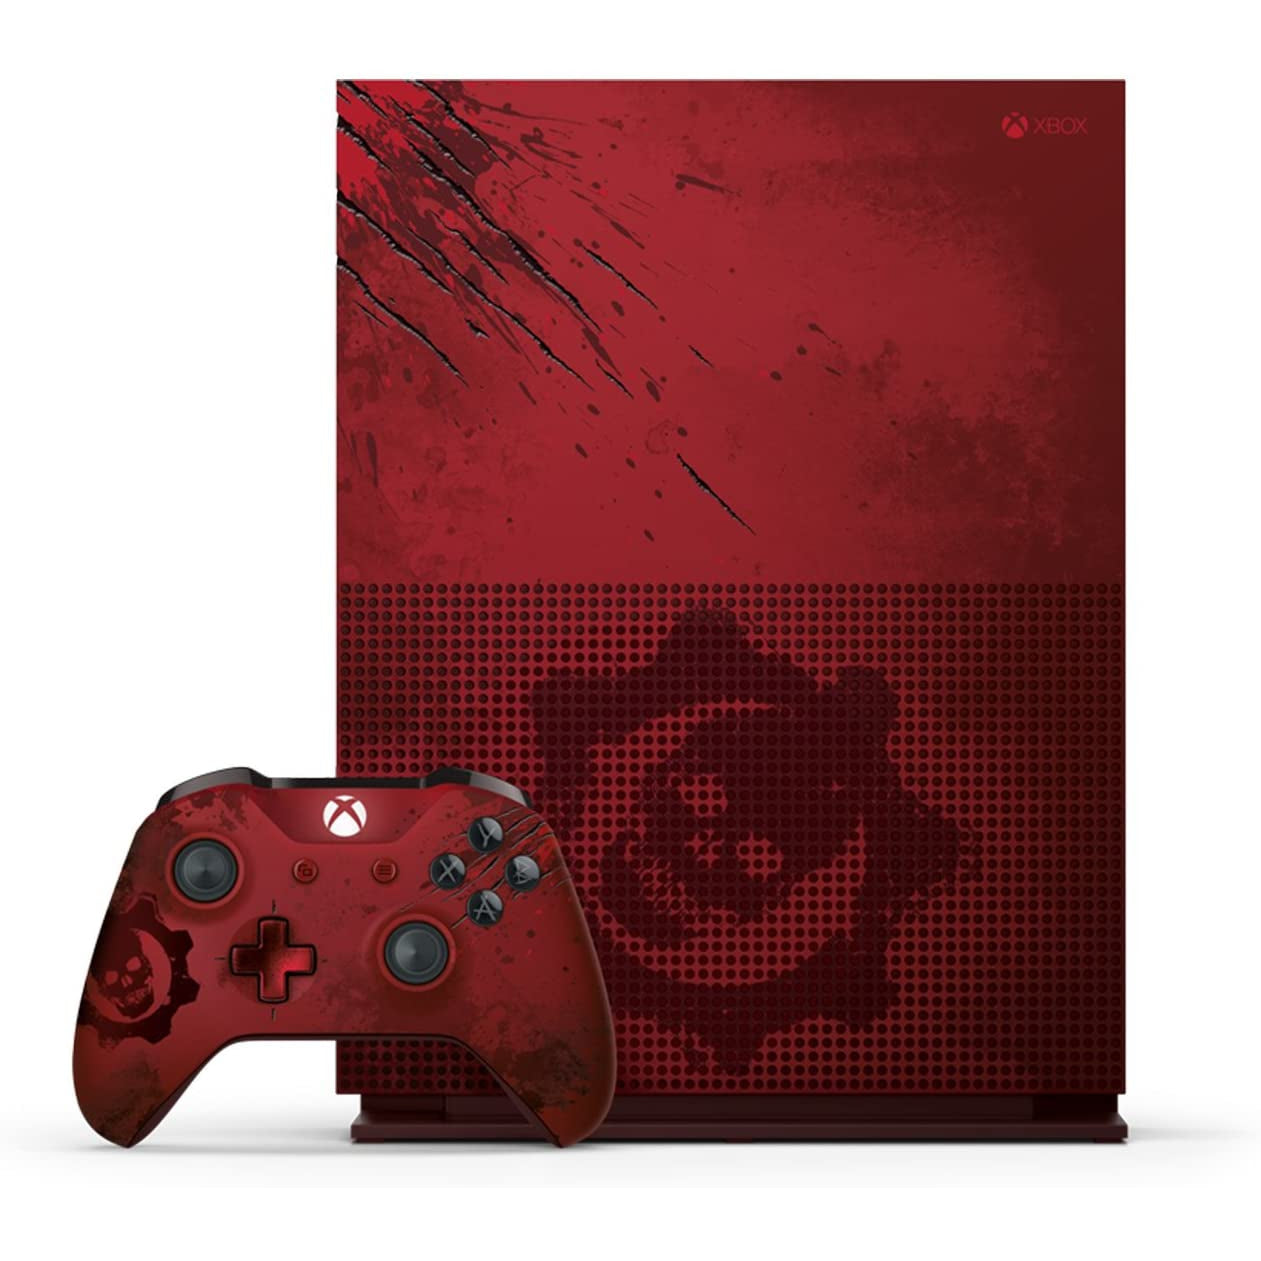 Xbox One S Gears of War 4 Limited Edition Console 2TB Refurbished Excellent